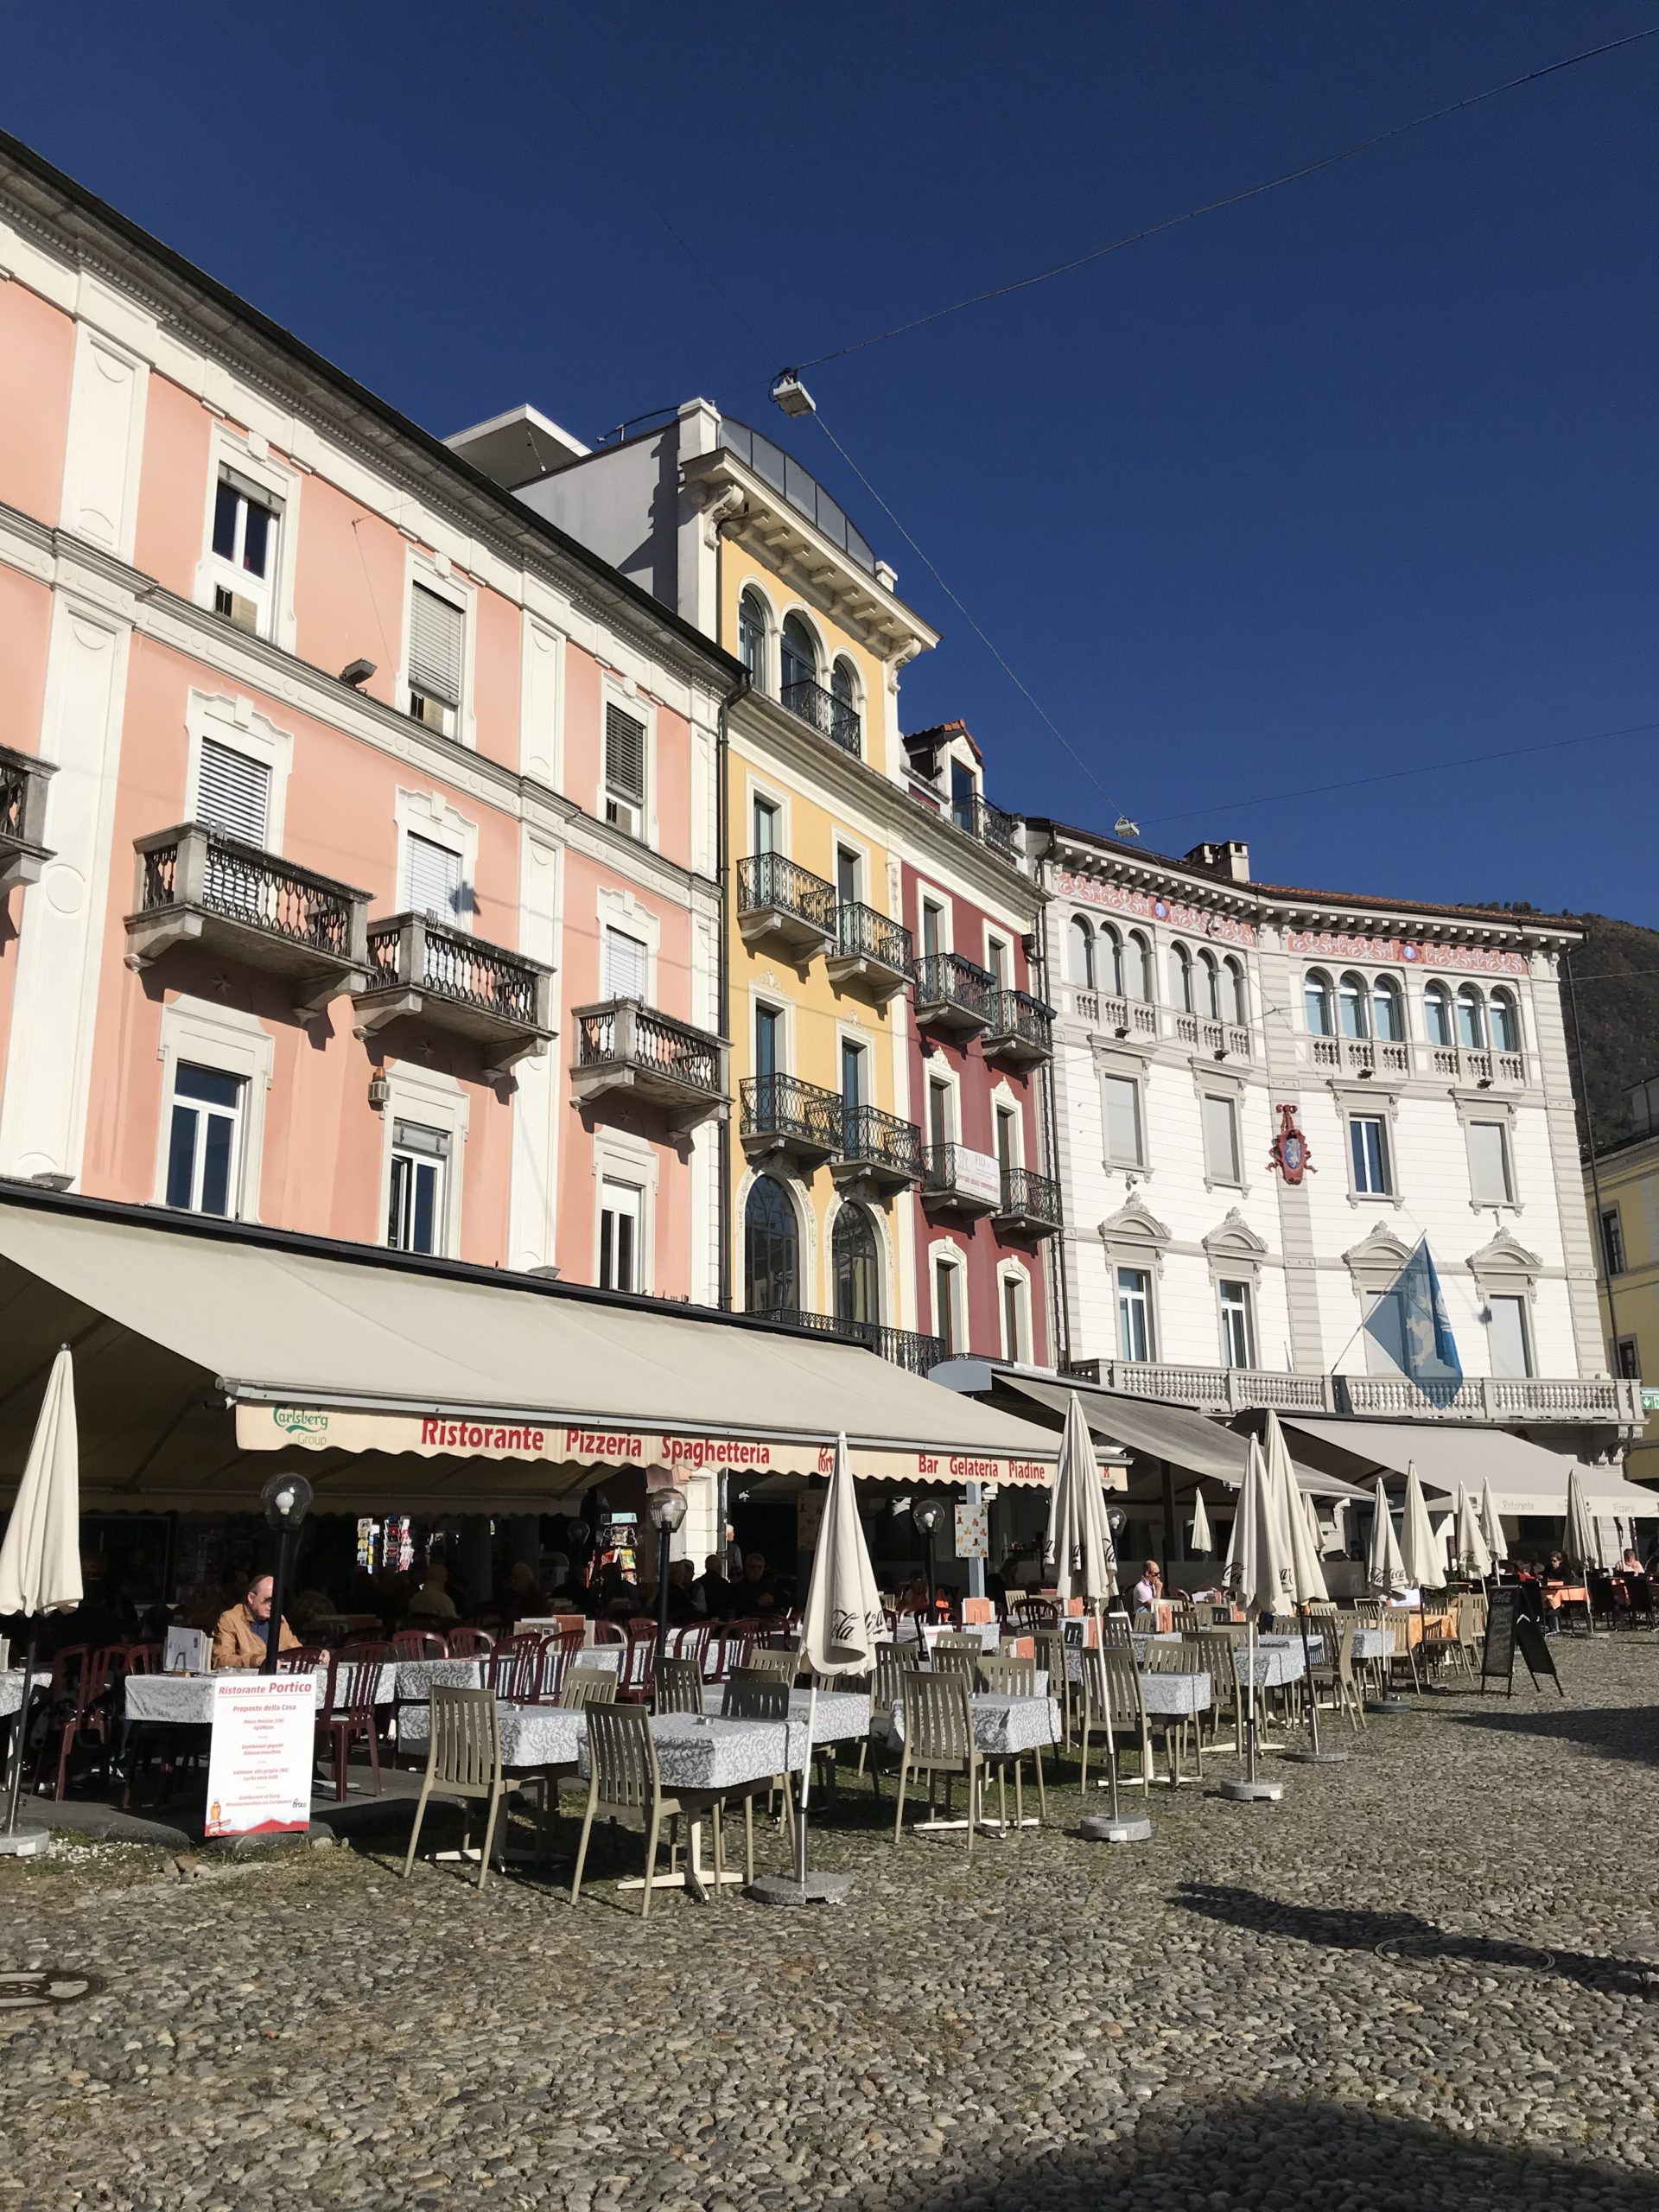 The pastel colors of Piazza Grande